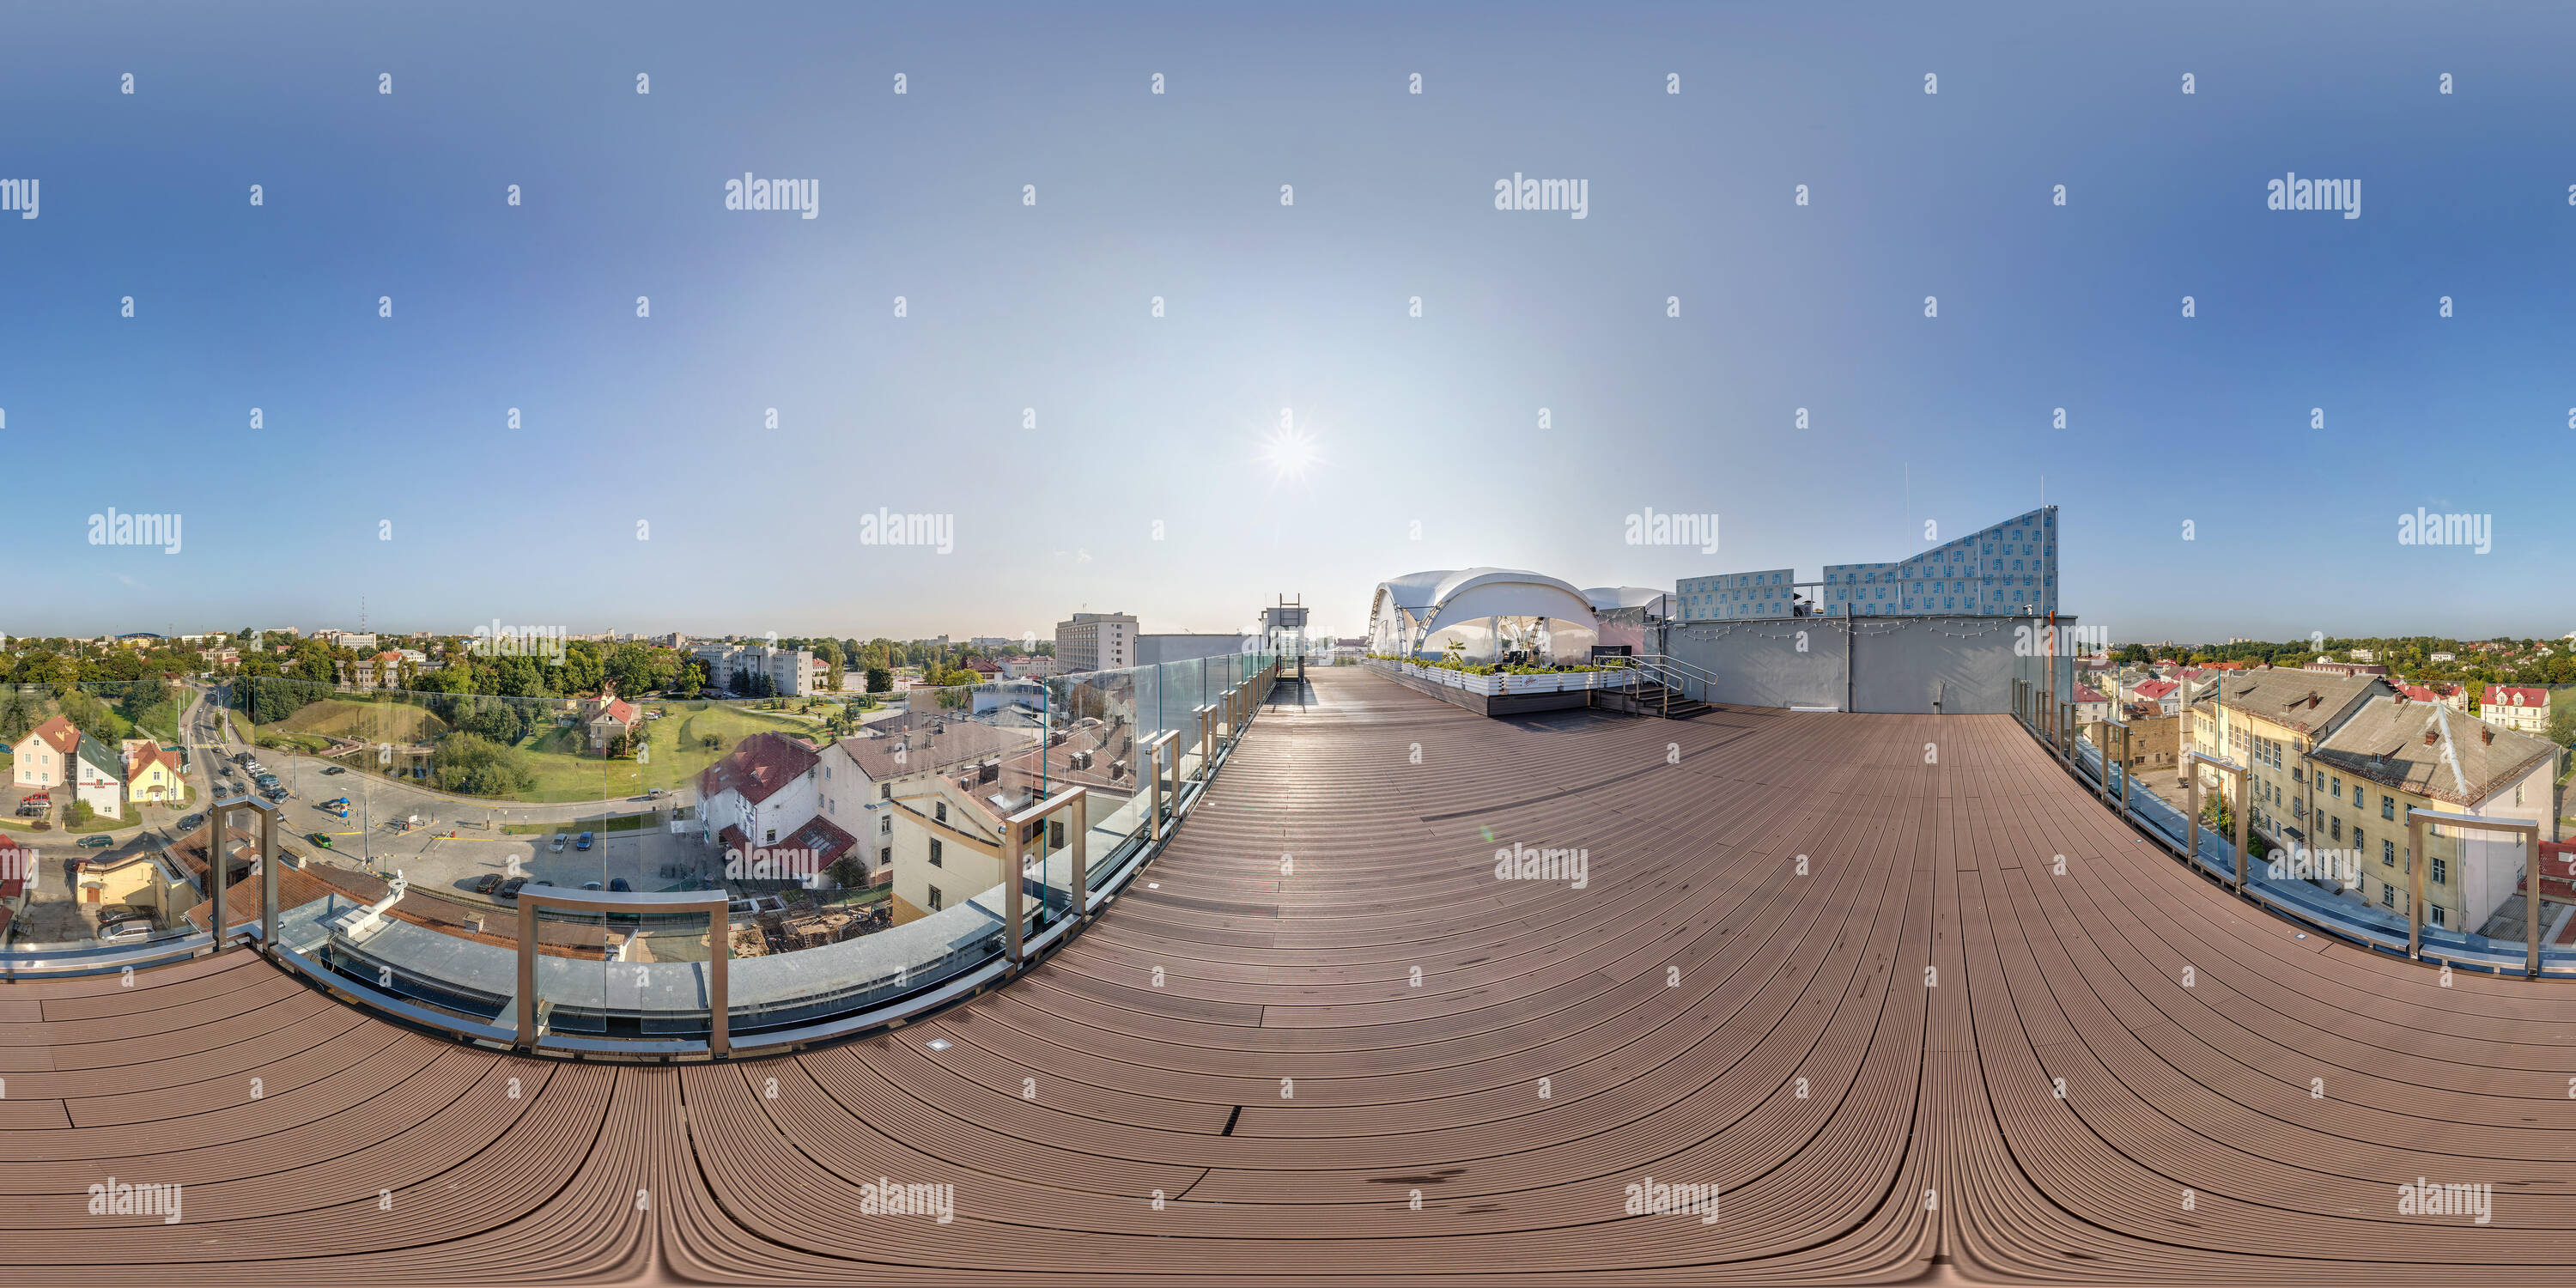 360 degree panoramic view of GRODNO, BELARUS - AUGUST, 2018: full seamless spherical hdri panorama 360 degrees angle view in cafe under canopy on roof of building overlooking old